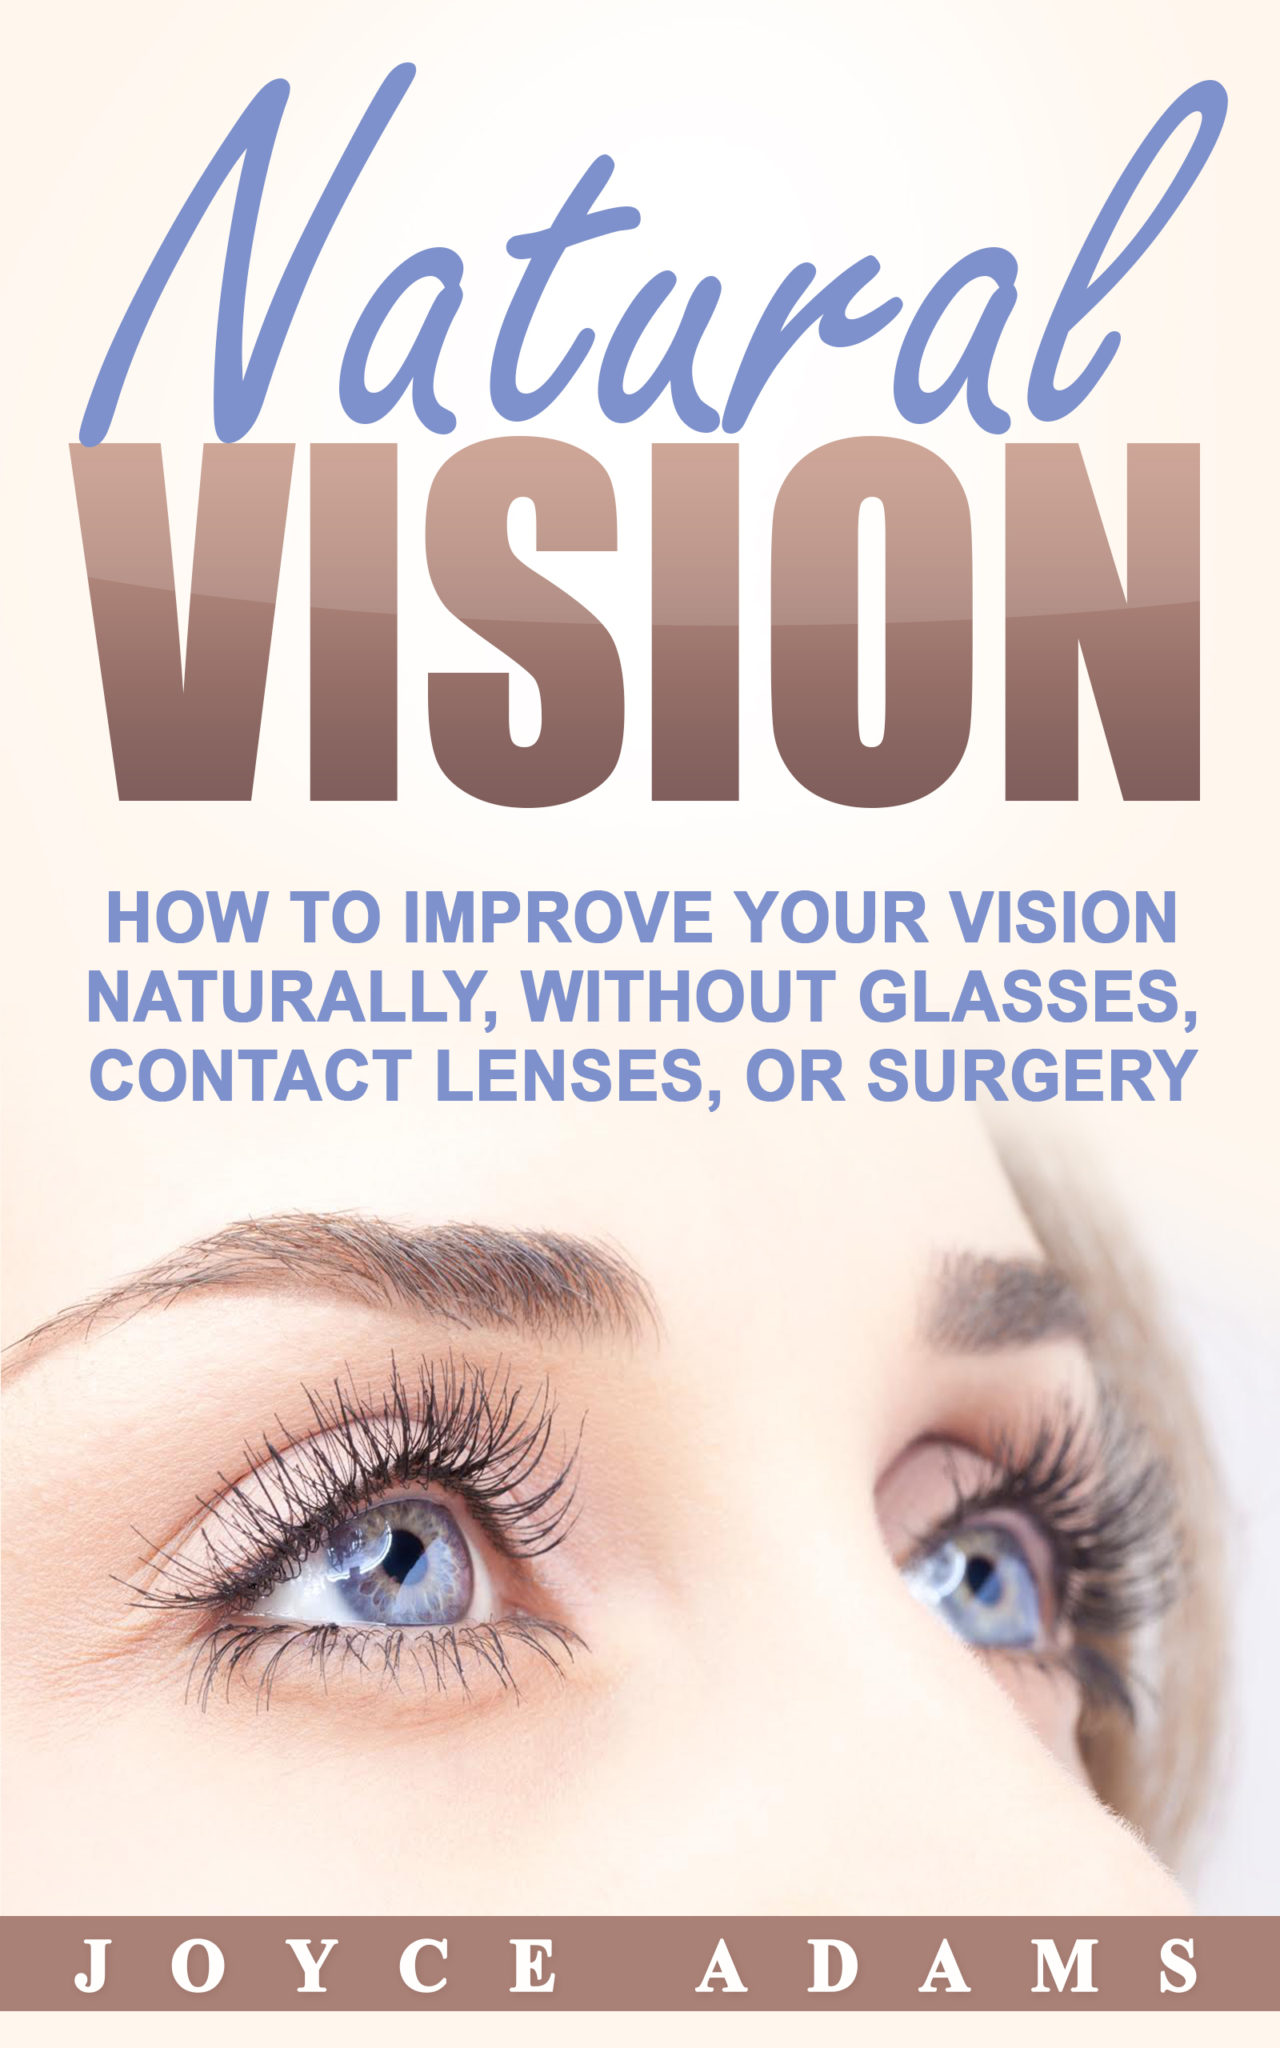 FREE: Natural Vision: How to Improve Your Vision Naturally, Without Glasses, Contact Lenses, or Surgery by Joyce Adams